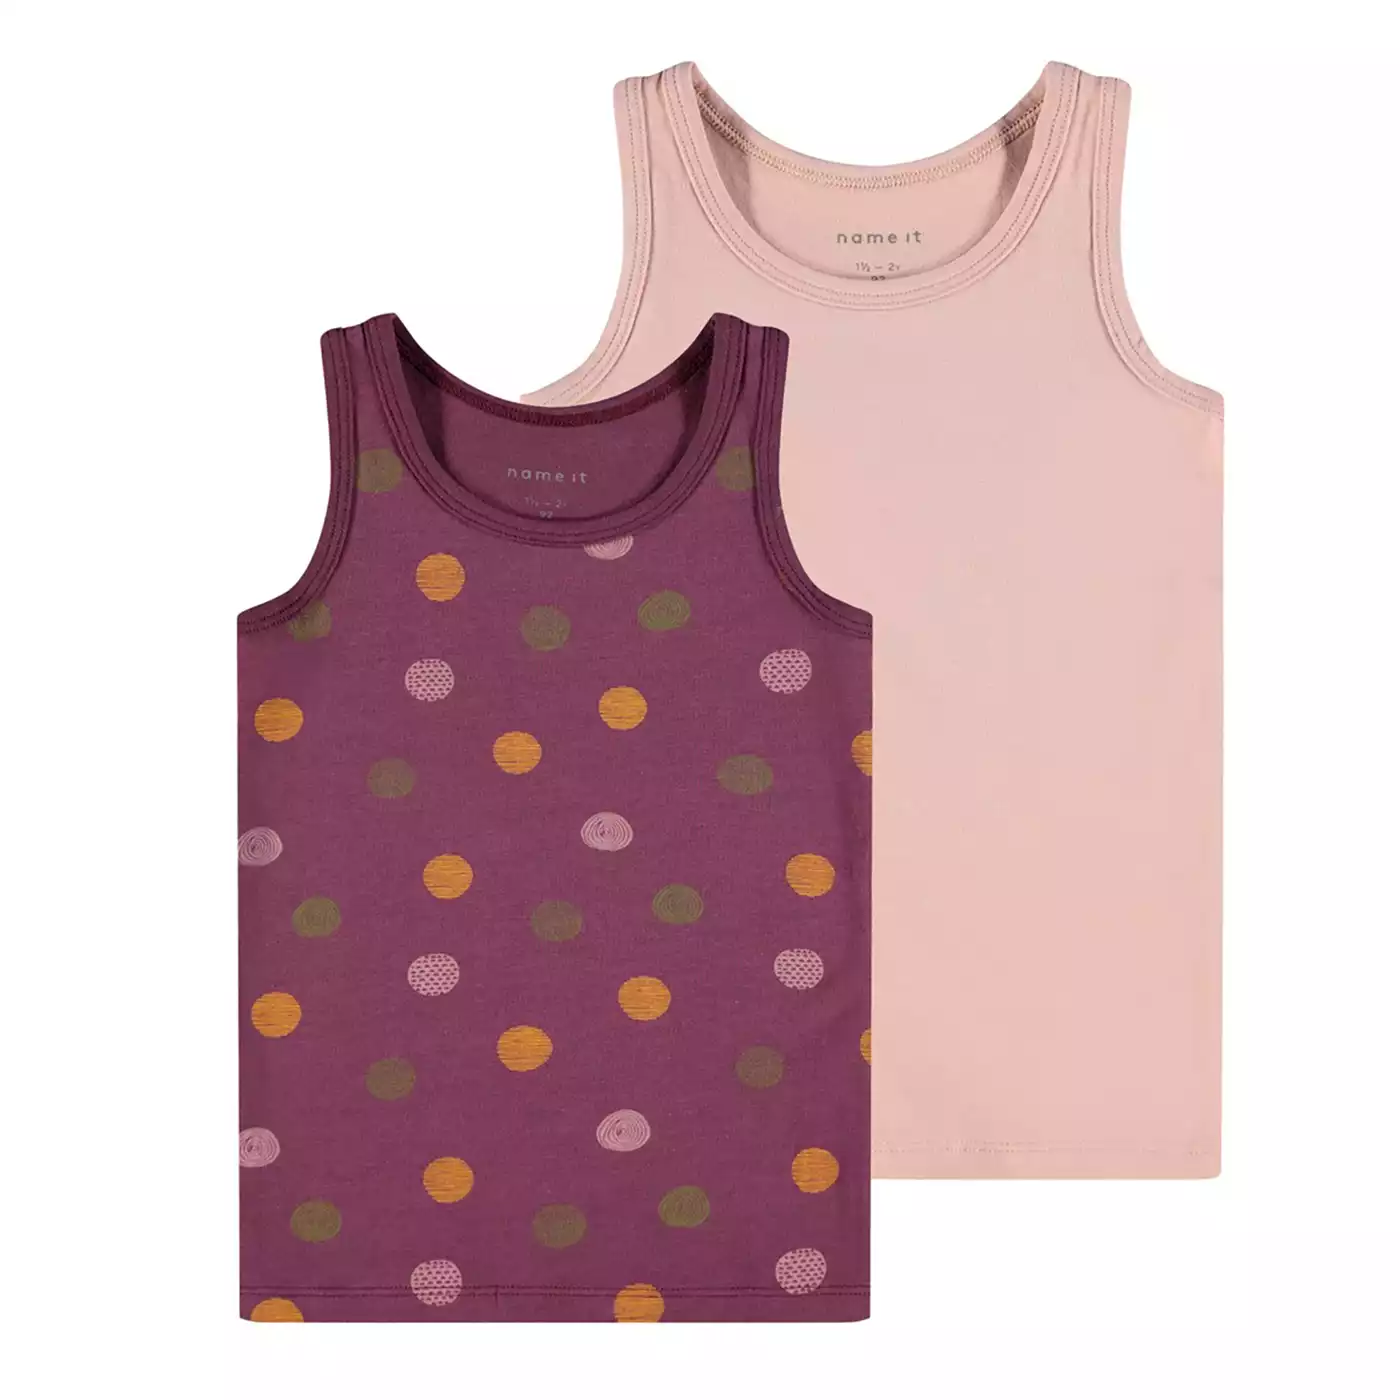 2er-Pack Tank Top Purple name it Pink Rosa Lila M2009580517005 3